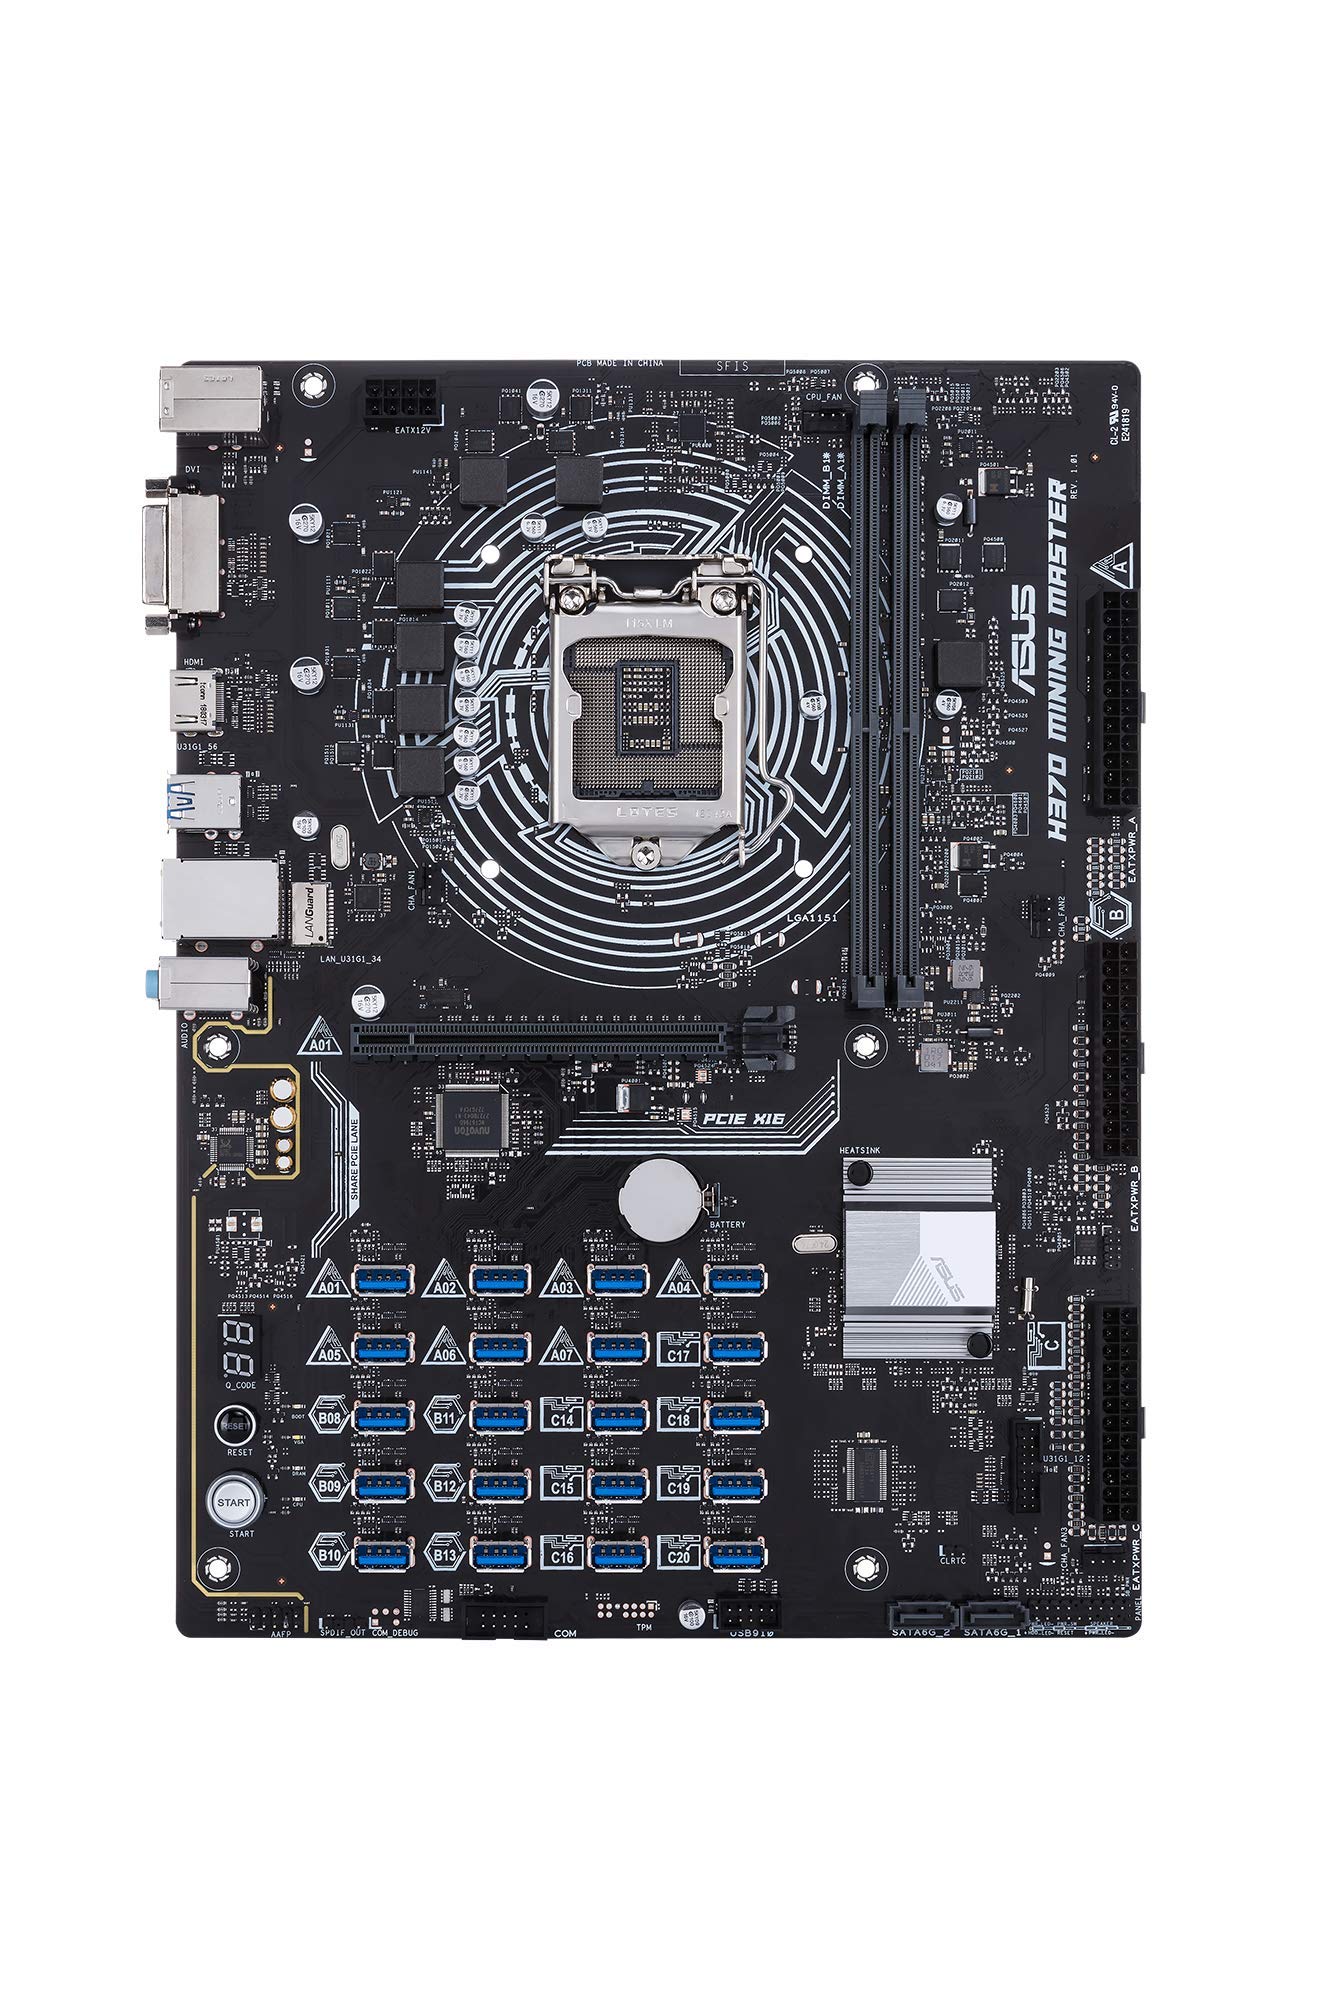 Asus made a crypto-mining motherboard that supports up to 20 GPUs - The Verge